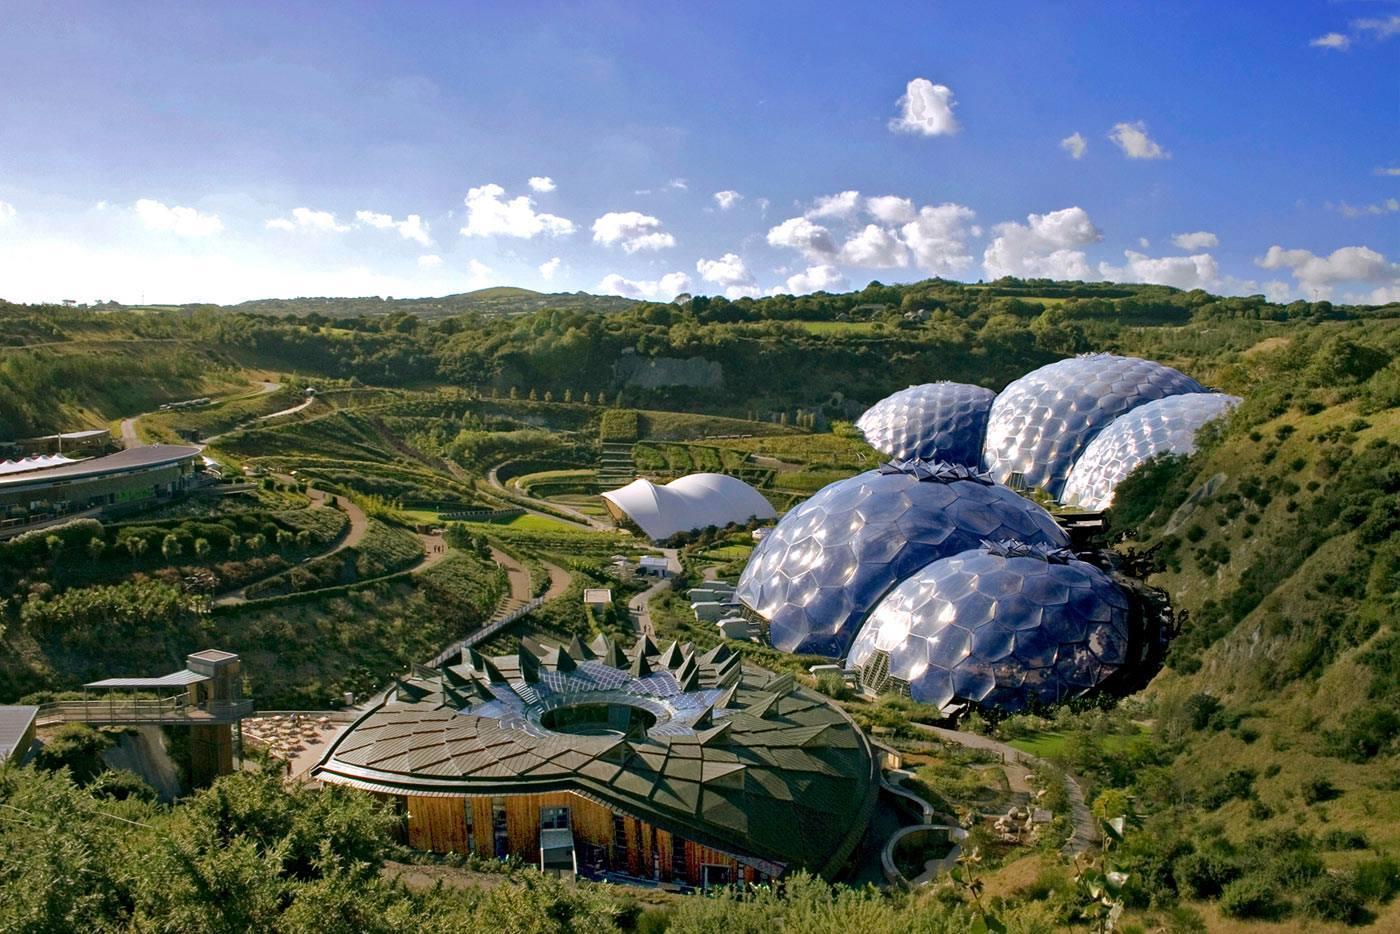 Most of the Eden Project’s sights are indoors